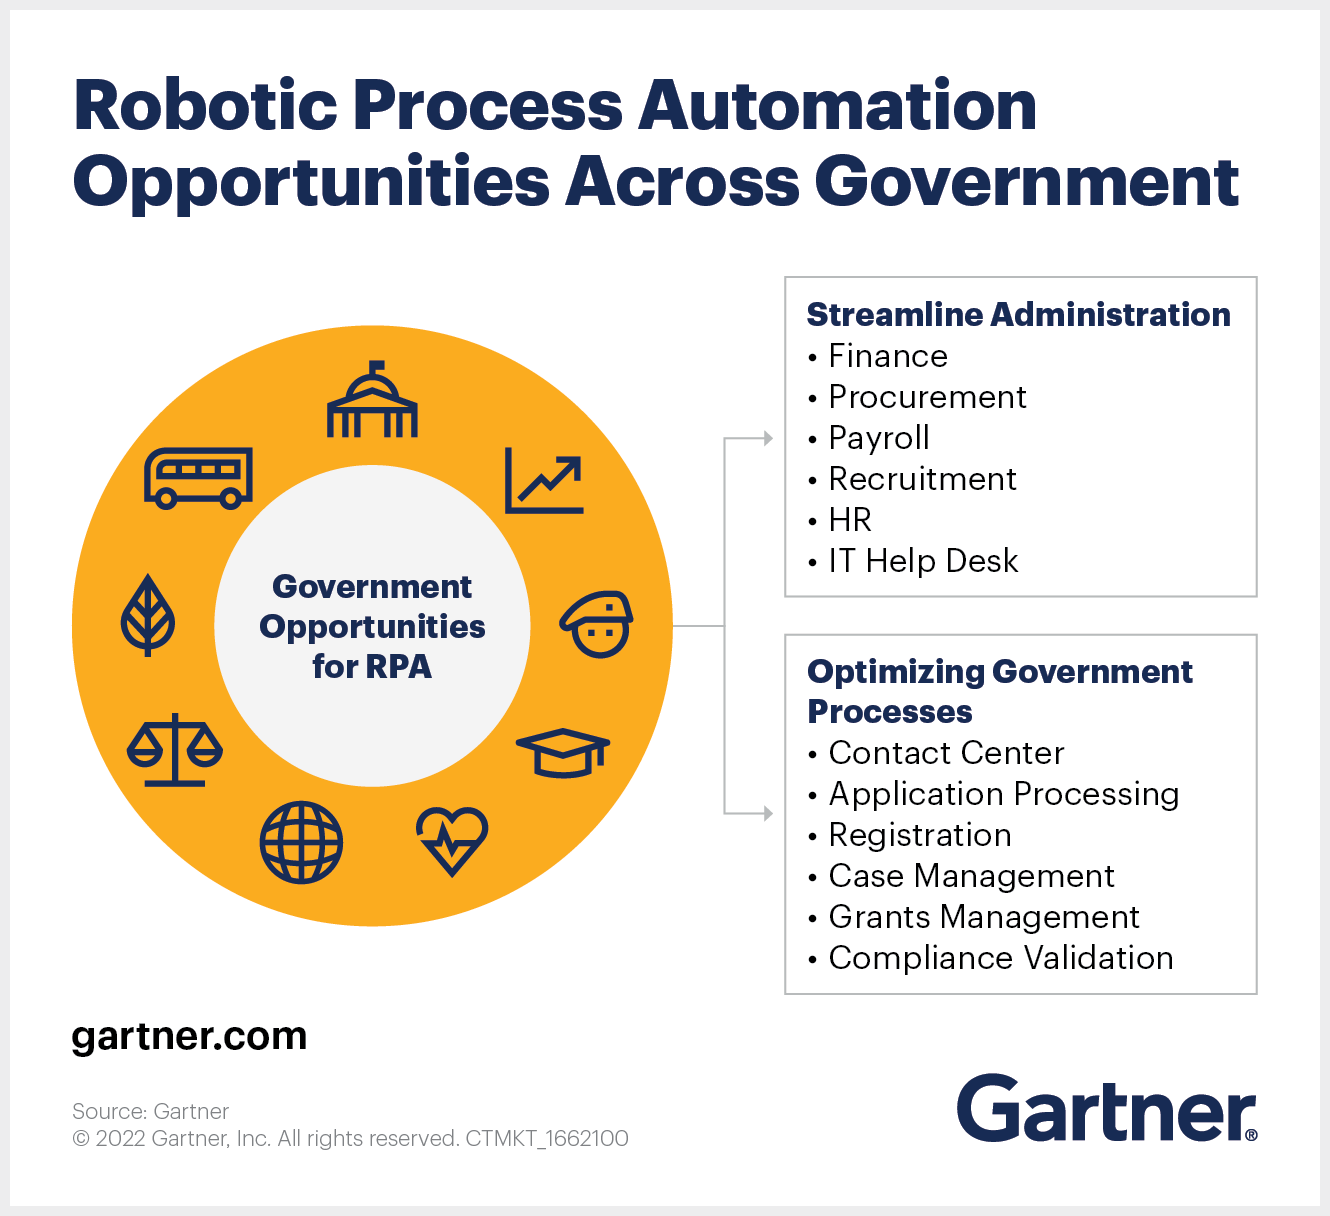 Robotic Process Automation Opportunities Across Government